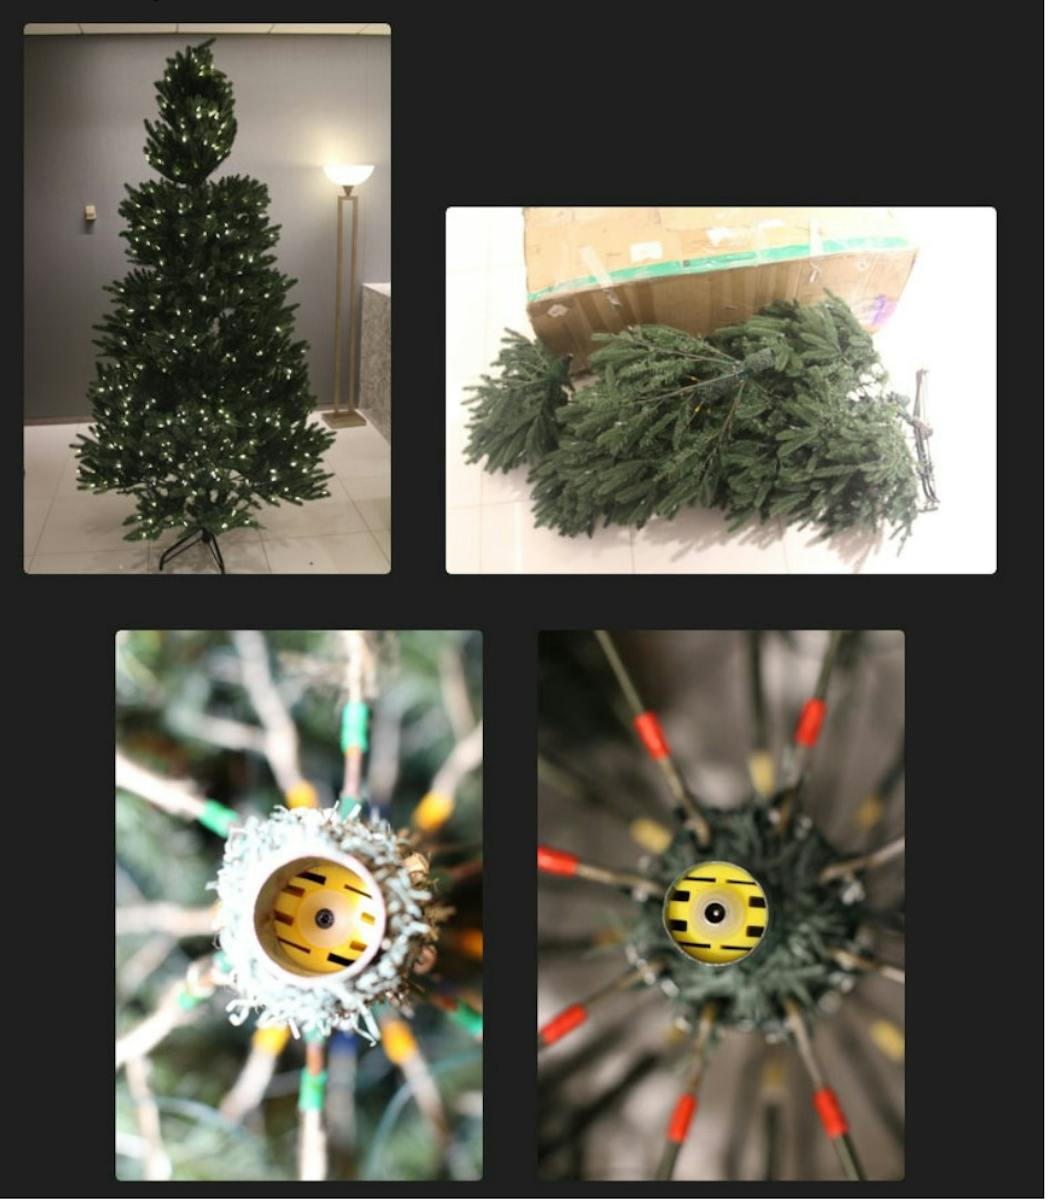 A court exhibit shows photos of the Willis Electric OnePlug Tree.